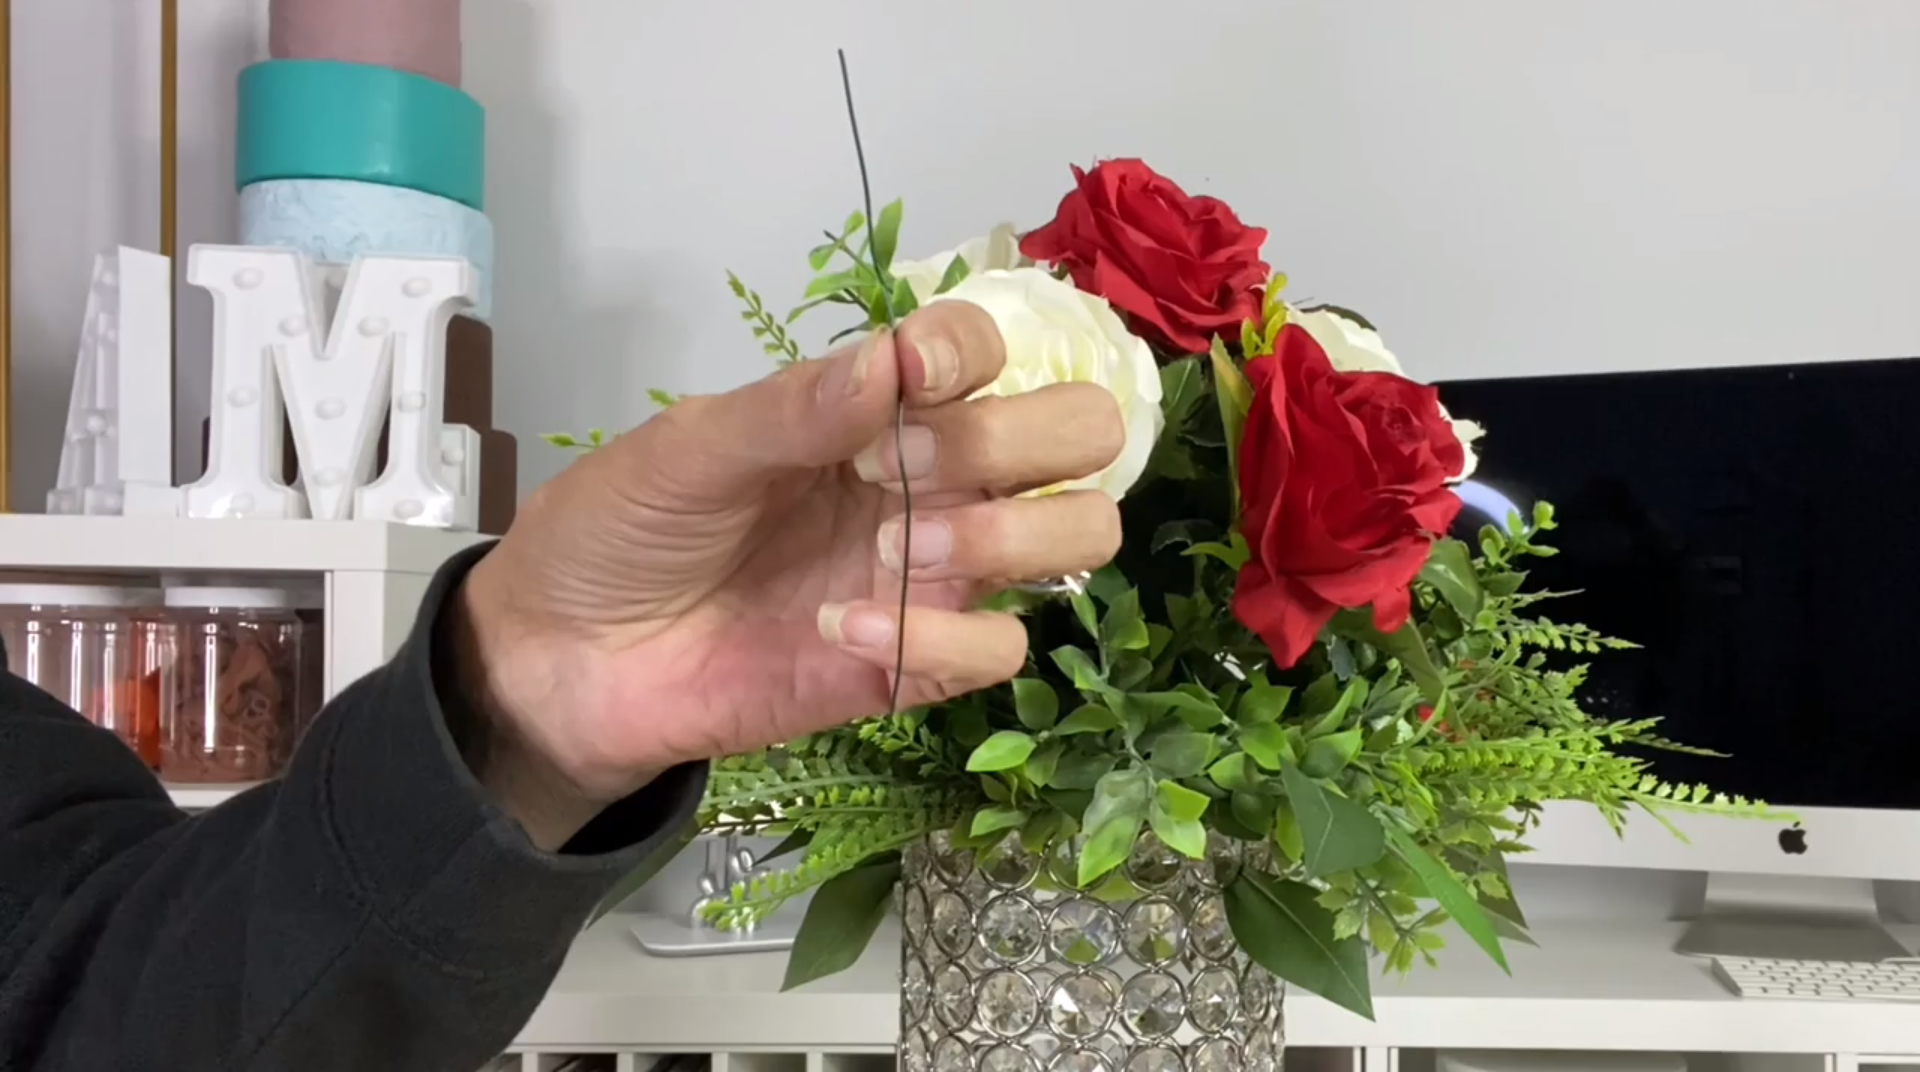 Floral wire to secure the rose centerpiece